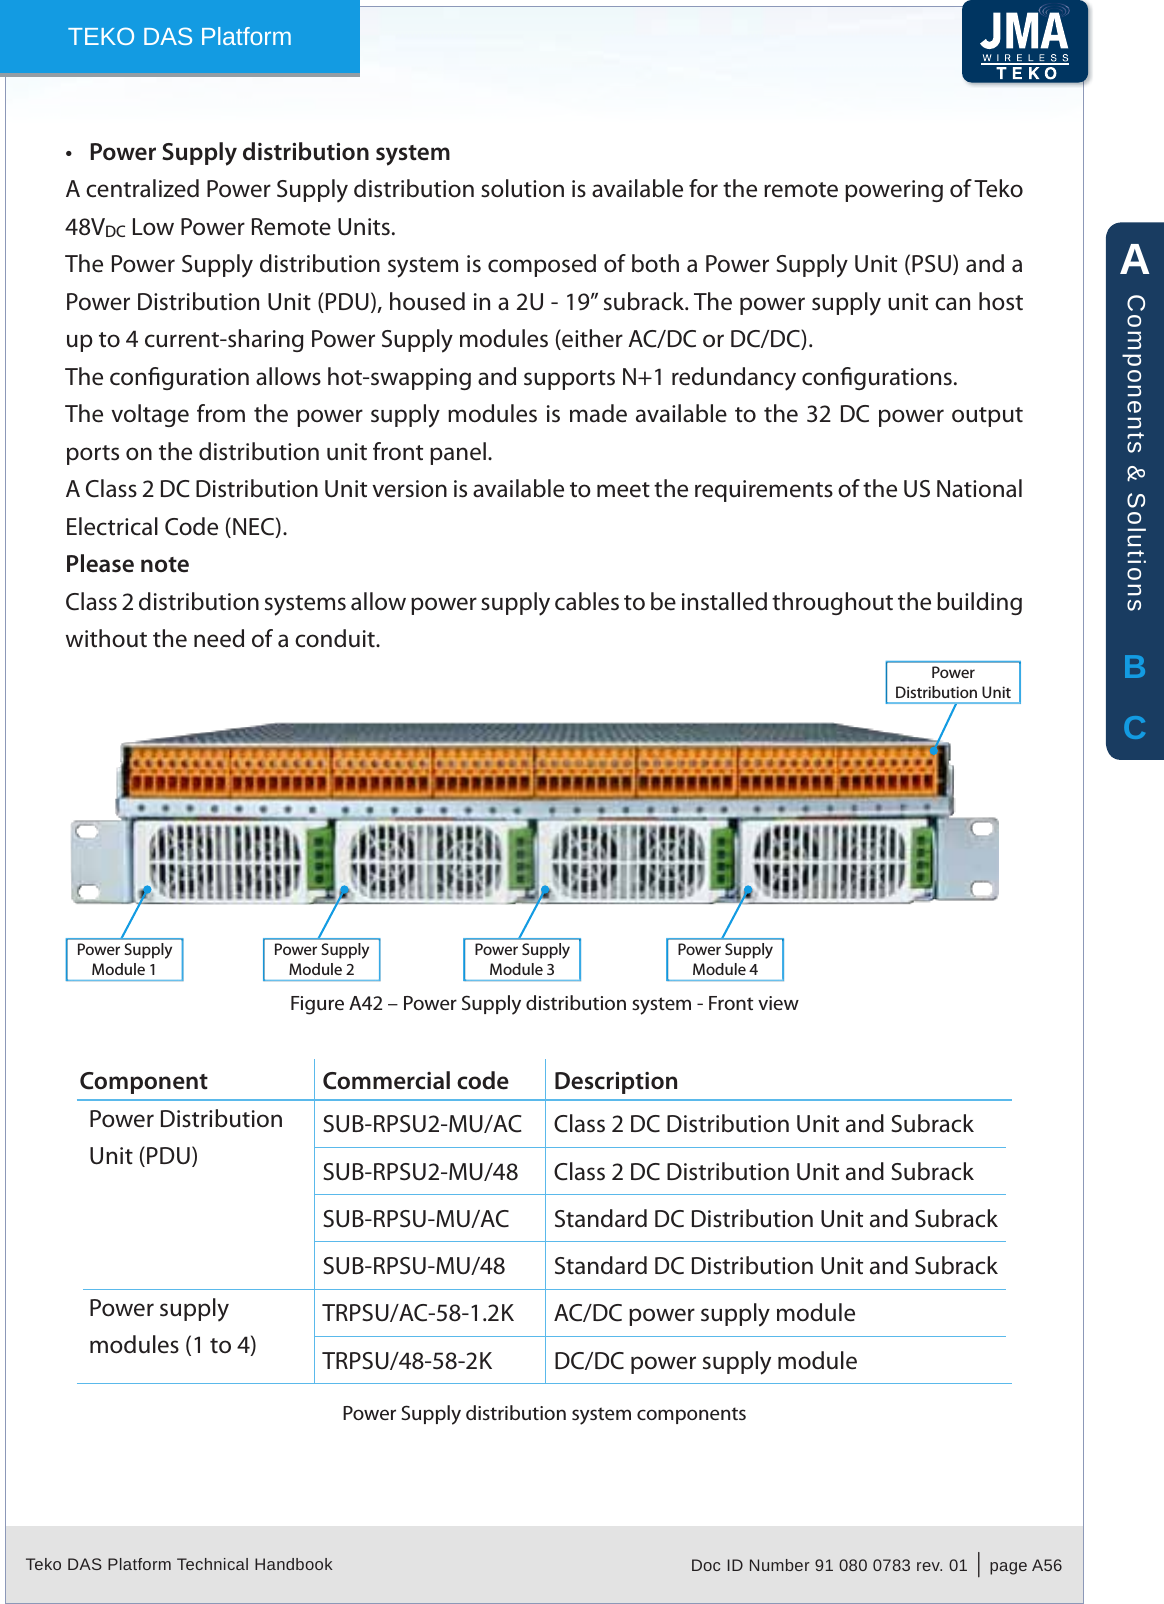 Teko DAS Platform Technical Handbook Doc ID Number 91 080 0783 rev. 01  |  page A56TEKO DAS PlatformPower Supply distribution system•A centralized Power Supply distribution solution is available for the remote powering of Teko 48VDC Low Power Remote Units.The Power Supply distribution system is composed of both a Power Supply Unit (PSU) and a Power Distribution Unit (PDU), housed in a 2U - 19” subrack. The power supply unit can host up to 4 current-sharing Power Supply modules (either AC/DC or DC/DC).The conguration allows hot-swapping and supports N+1 redundancy congurations.The voltage from the power supply modules is made available to the 32 DC power output ports on the distribution unit front panel.A Class 2 DC Distribution Unit version is available to meet the requirements of the US National Electrical Code (NEC).Please noteClass 2 distribution systems allow power supply cables to be installed throughout the building without the need of a conduit.Power Supply Module 1Power Supply Module 3Power Supply Module 2Power Supply Module 4Power Distribution UnitPower Supply distribution system - Front viewFigure A42 – Component Commercial code DescriptionPower Distribution Unit (PDU)SUB-RPSU2-MU/AC Class 2 DC Distribution Unit and SubrackSUB-RPSU2-MU/48 Class 2 DC Distribution Unit and SubrackSUB-RPSU-MU/AC Standard DC Distribution Unit and SubrackSUB-RPSU-MU/48 Standard DC Distribution Unit and SubrackPower supply modules (1 to 4)TRPSU/AC-58-1.2K AC/DC power supply moduleTRPSU/48-58-2K DC/DC power supply modulePower Supply distribution system componentsABCComponents &amp; Solutions